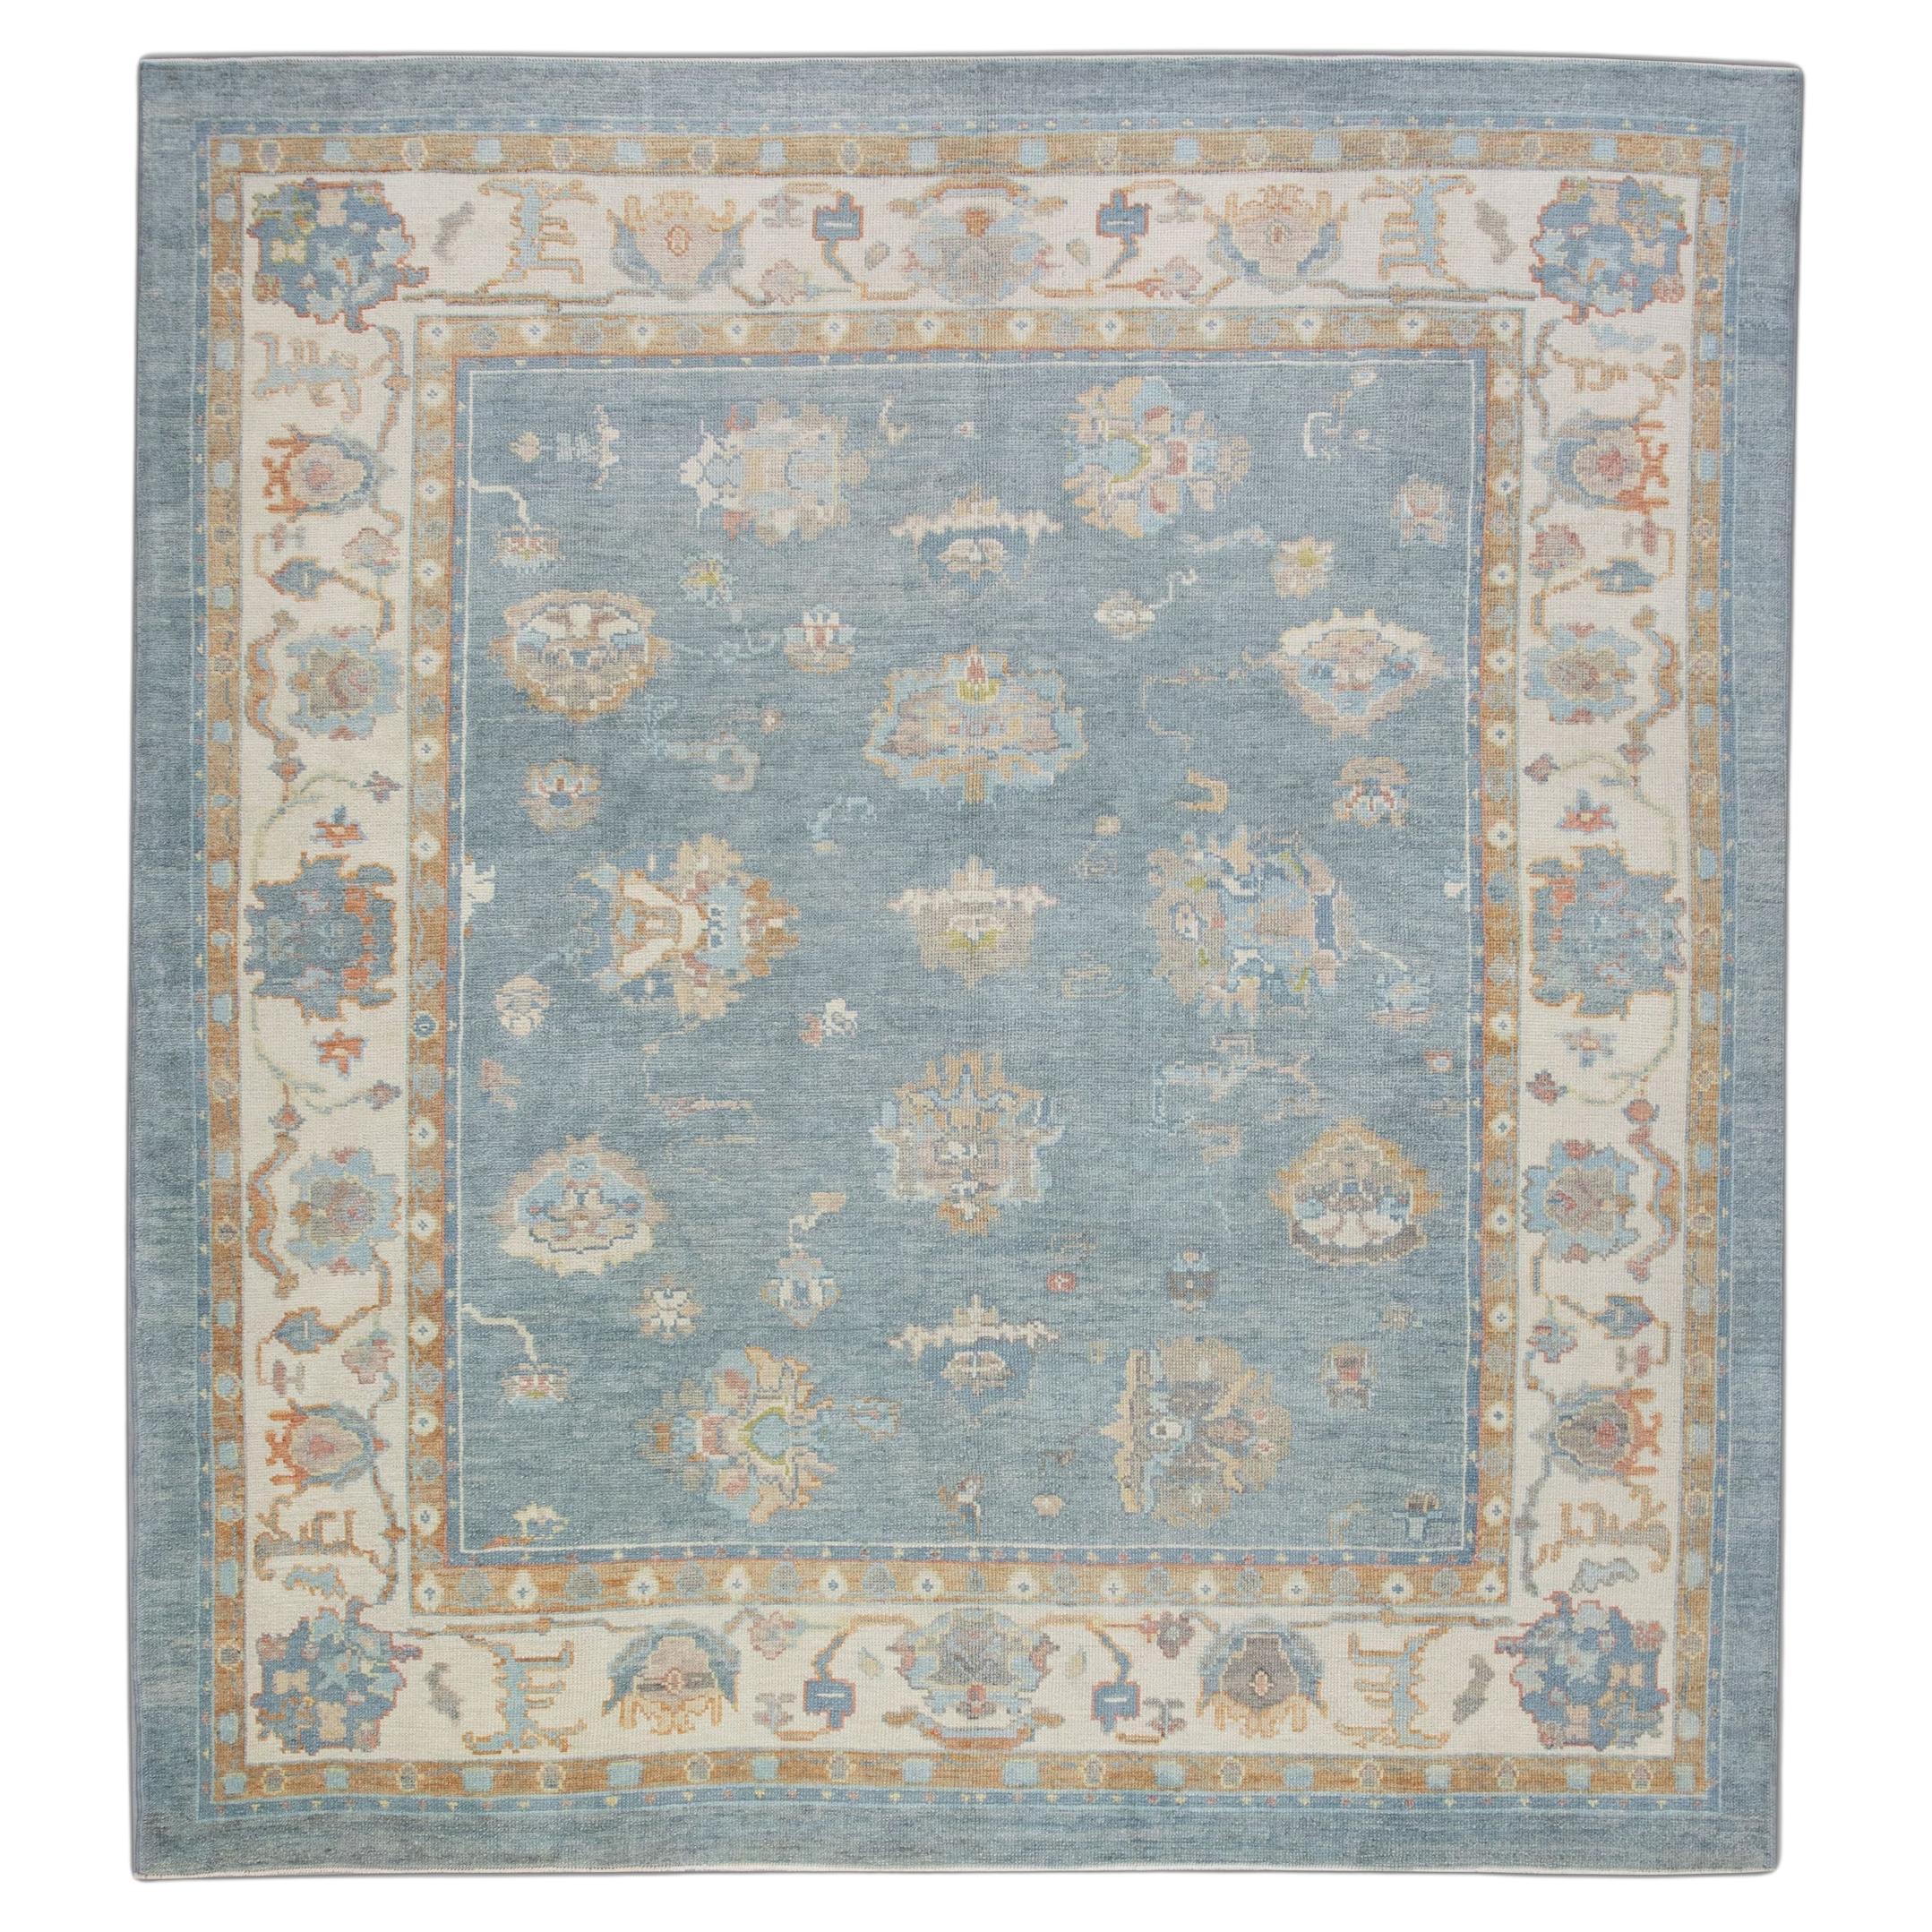 Blue Floral Design Turkish Oushak Rug Made with Handwoven Wool 9'4" x 9'9" For Sale